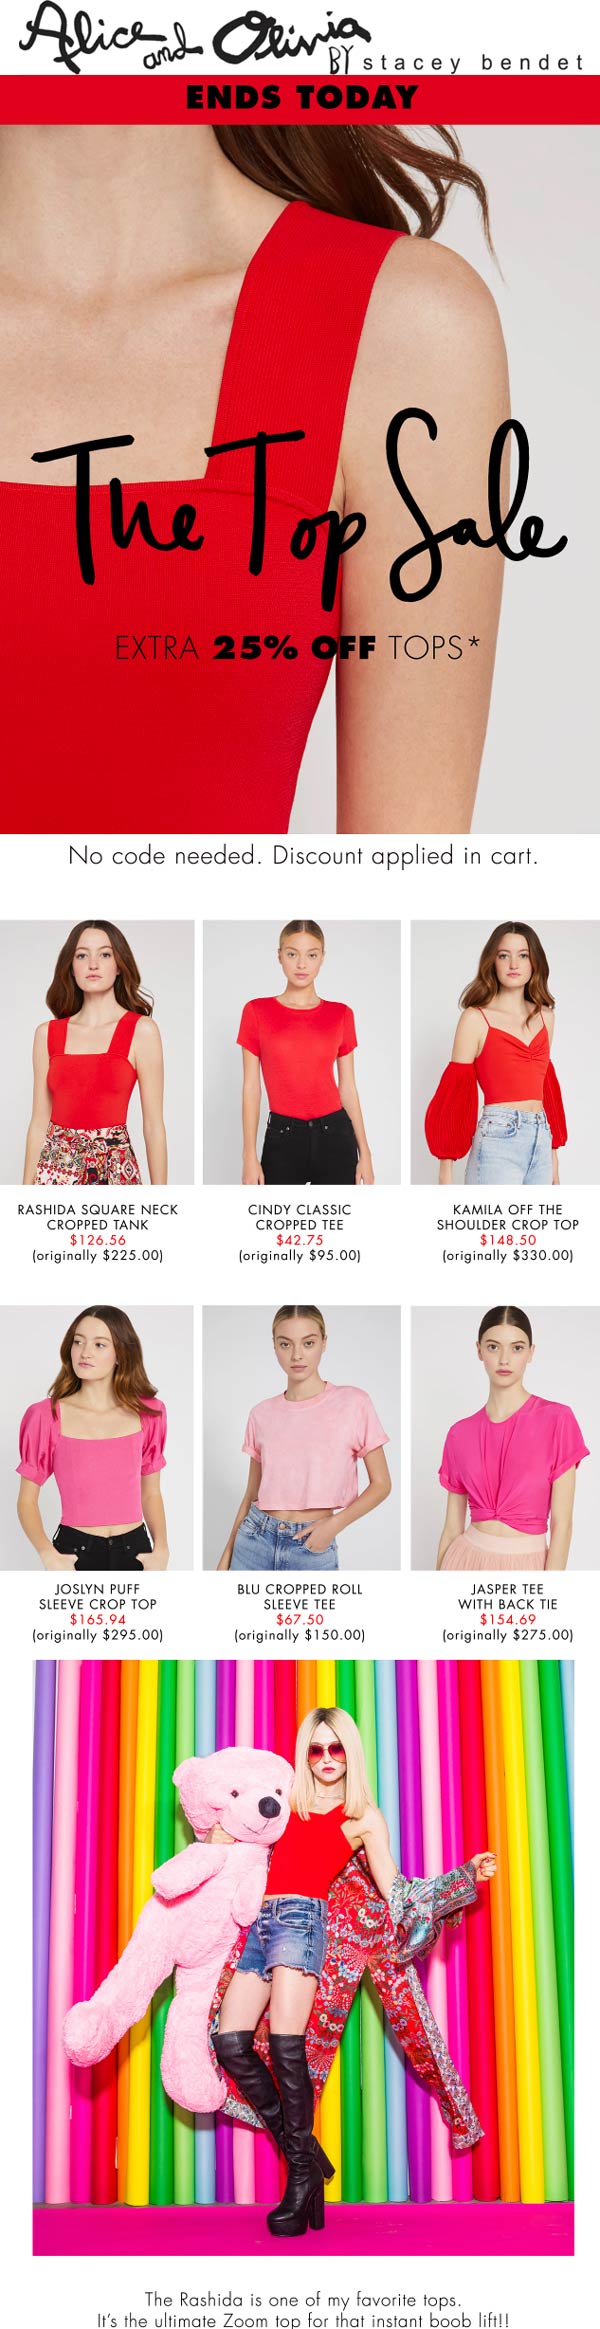 Alice and Olivia stores Coupon  Extra 25% off tops today at Alice and Olivia #aliceandolivia